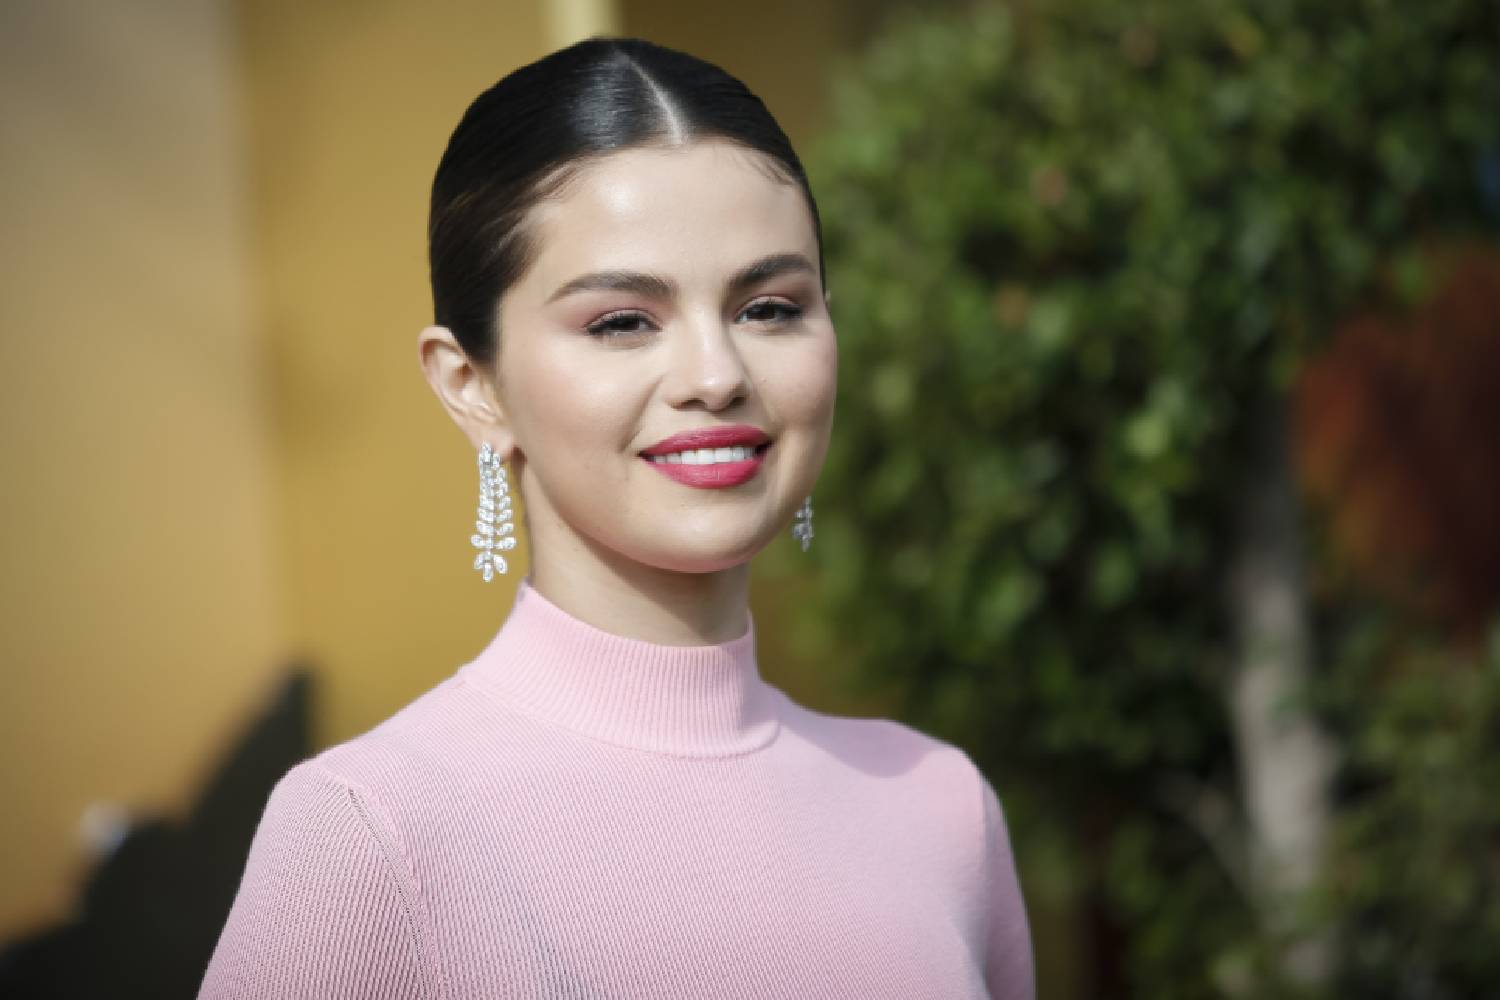 The Unexpected Hack Selena Gomez Uses For Her Lips Will Completely Change Your Routine